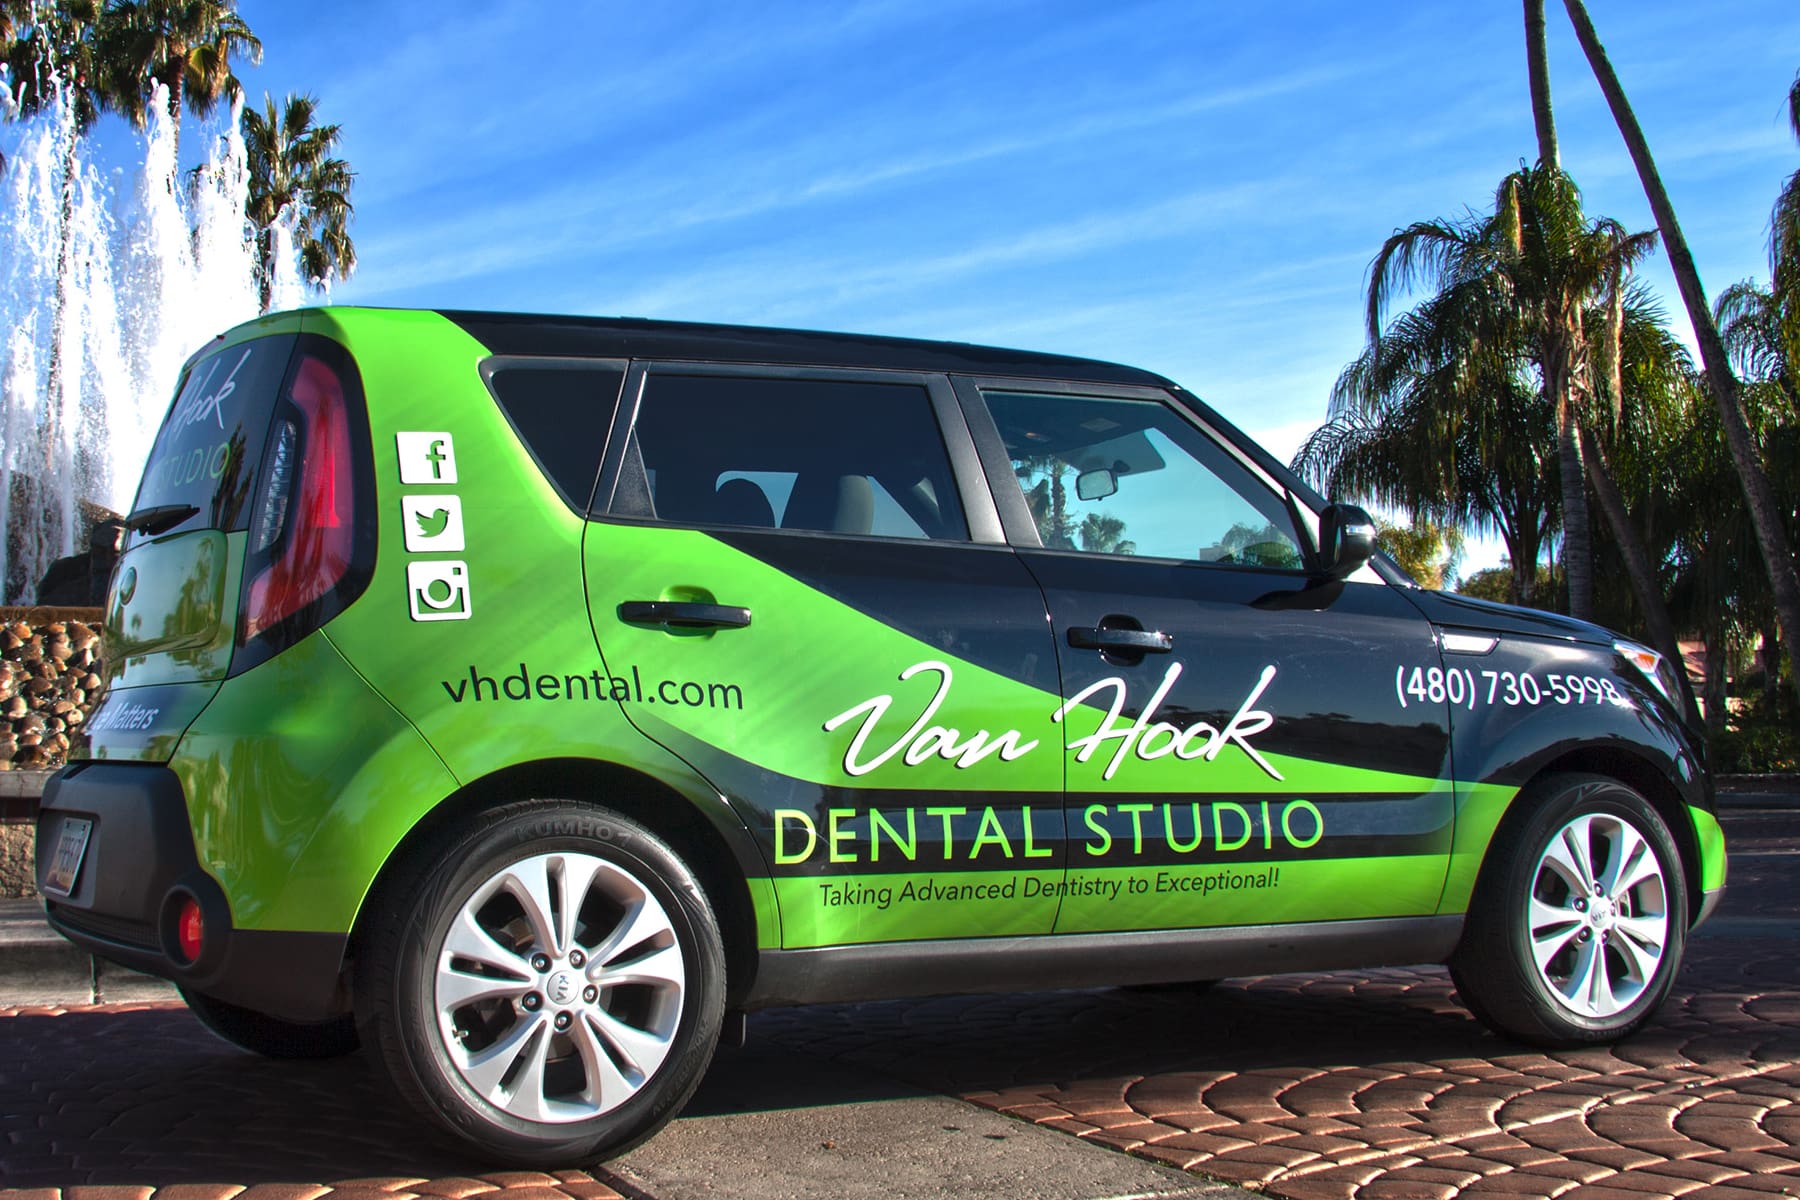 Kia Soul with a green and black vehicle wrap featuring Van Hook Dental